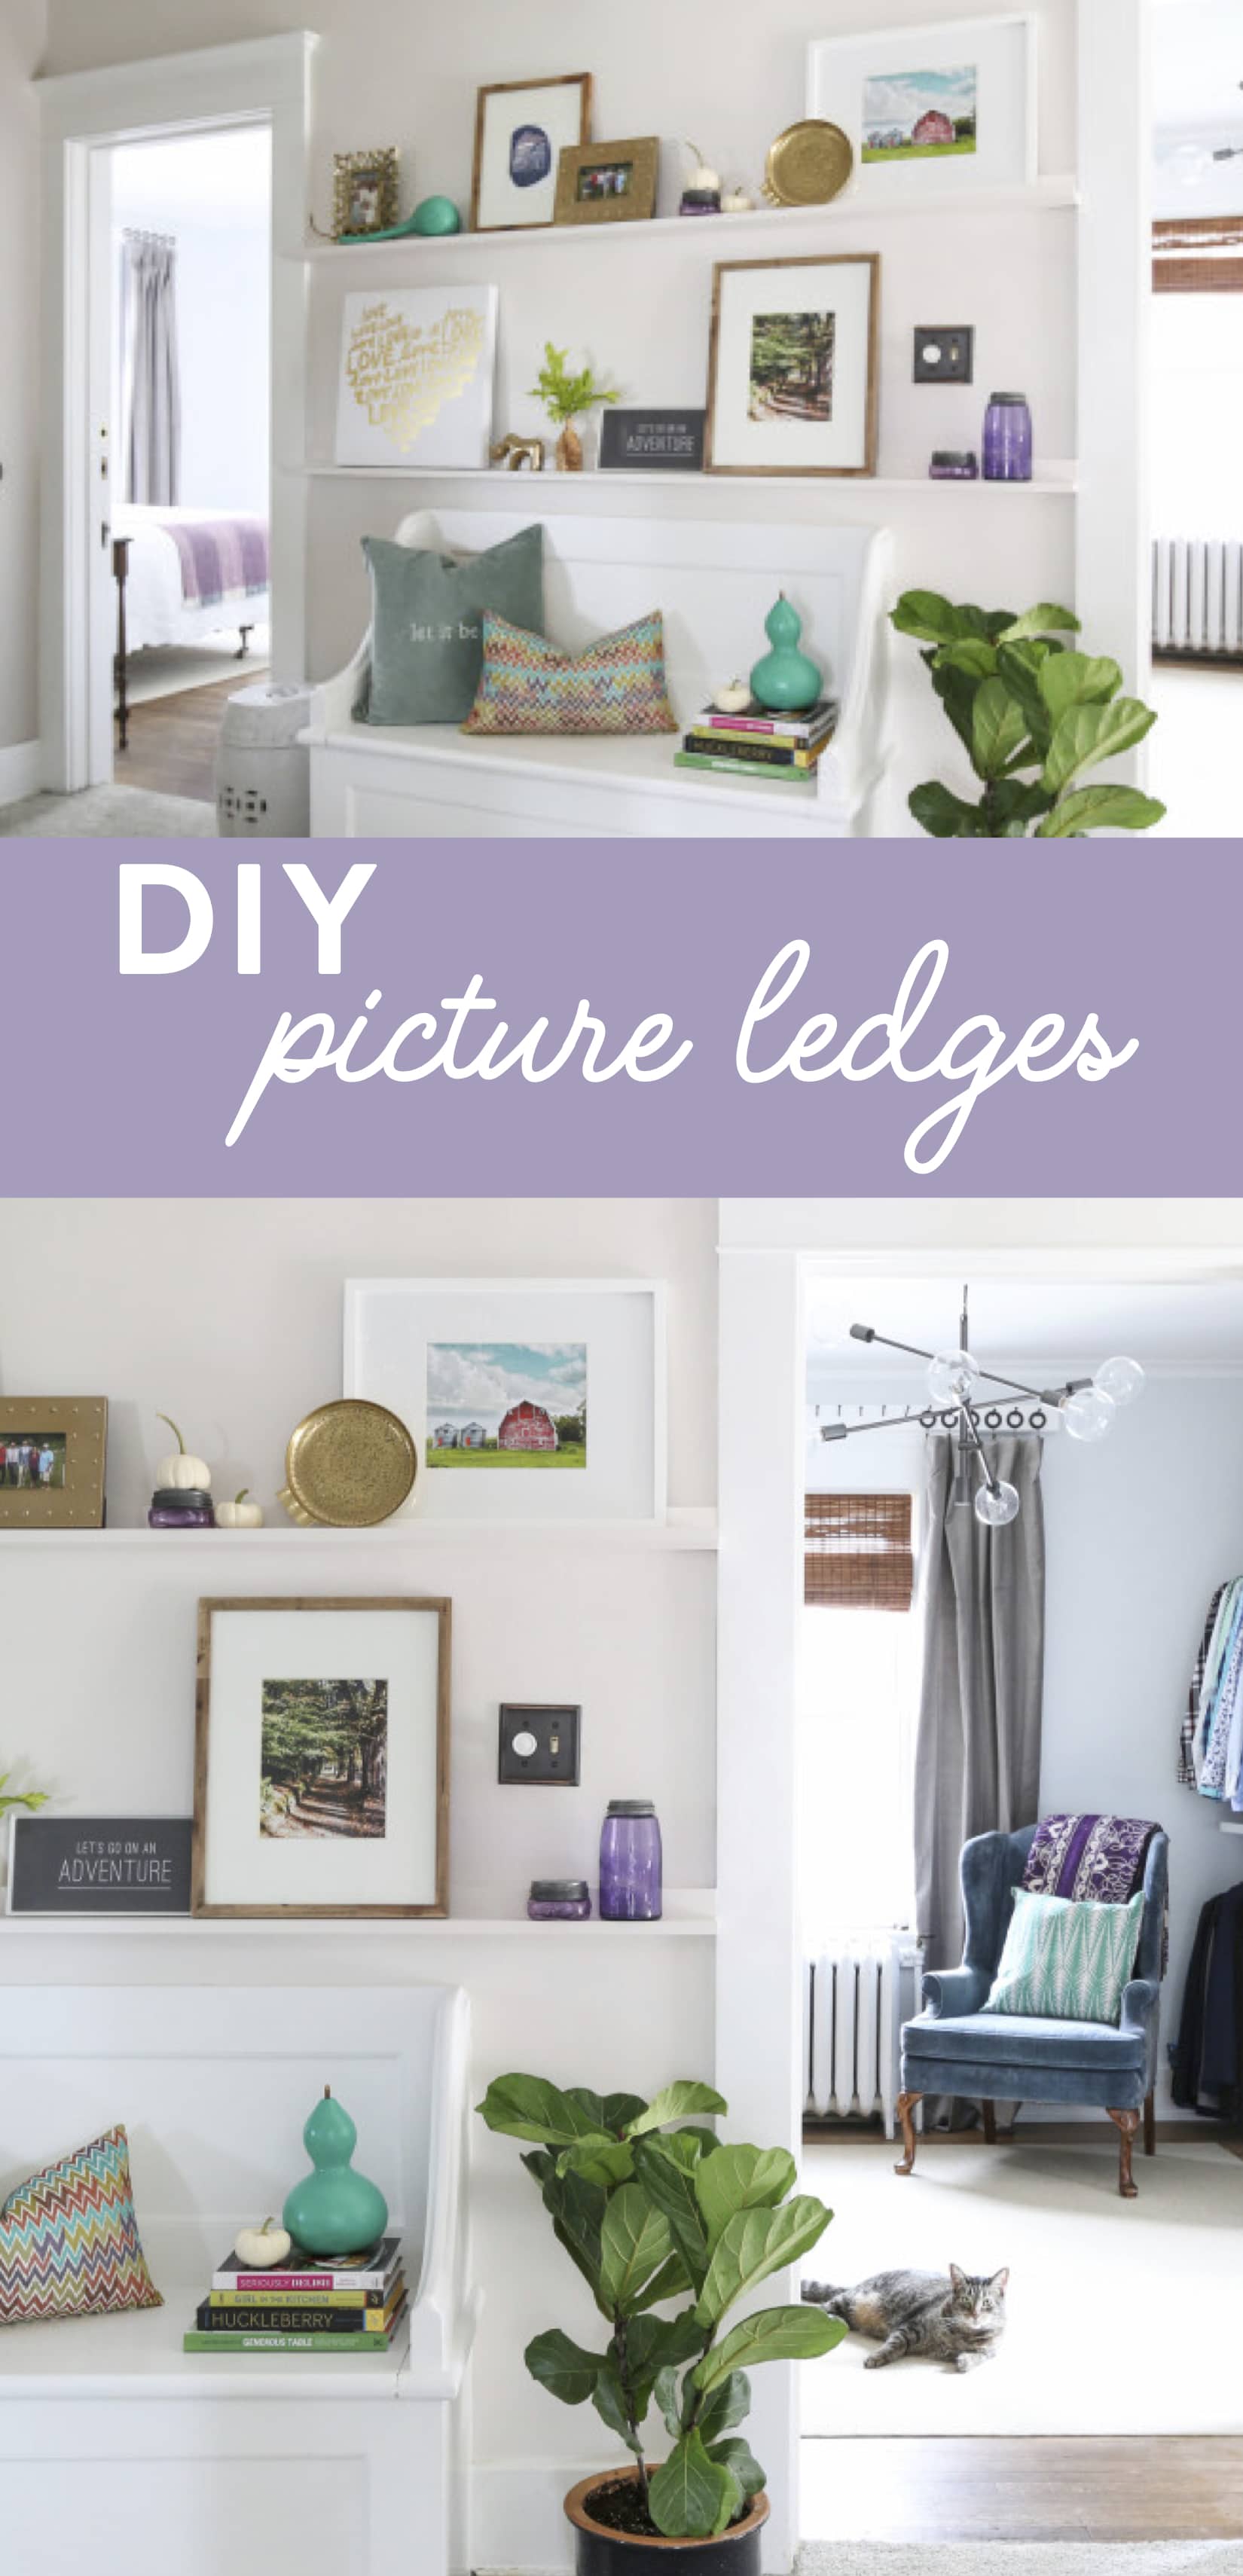 #DIY Picture Ledge tutorial - quick and inexpensive project anyone can tackle. #Picture #ledges are an easy way to decorate a wall with ease and style!